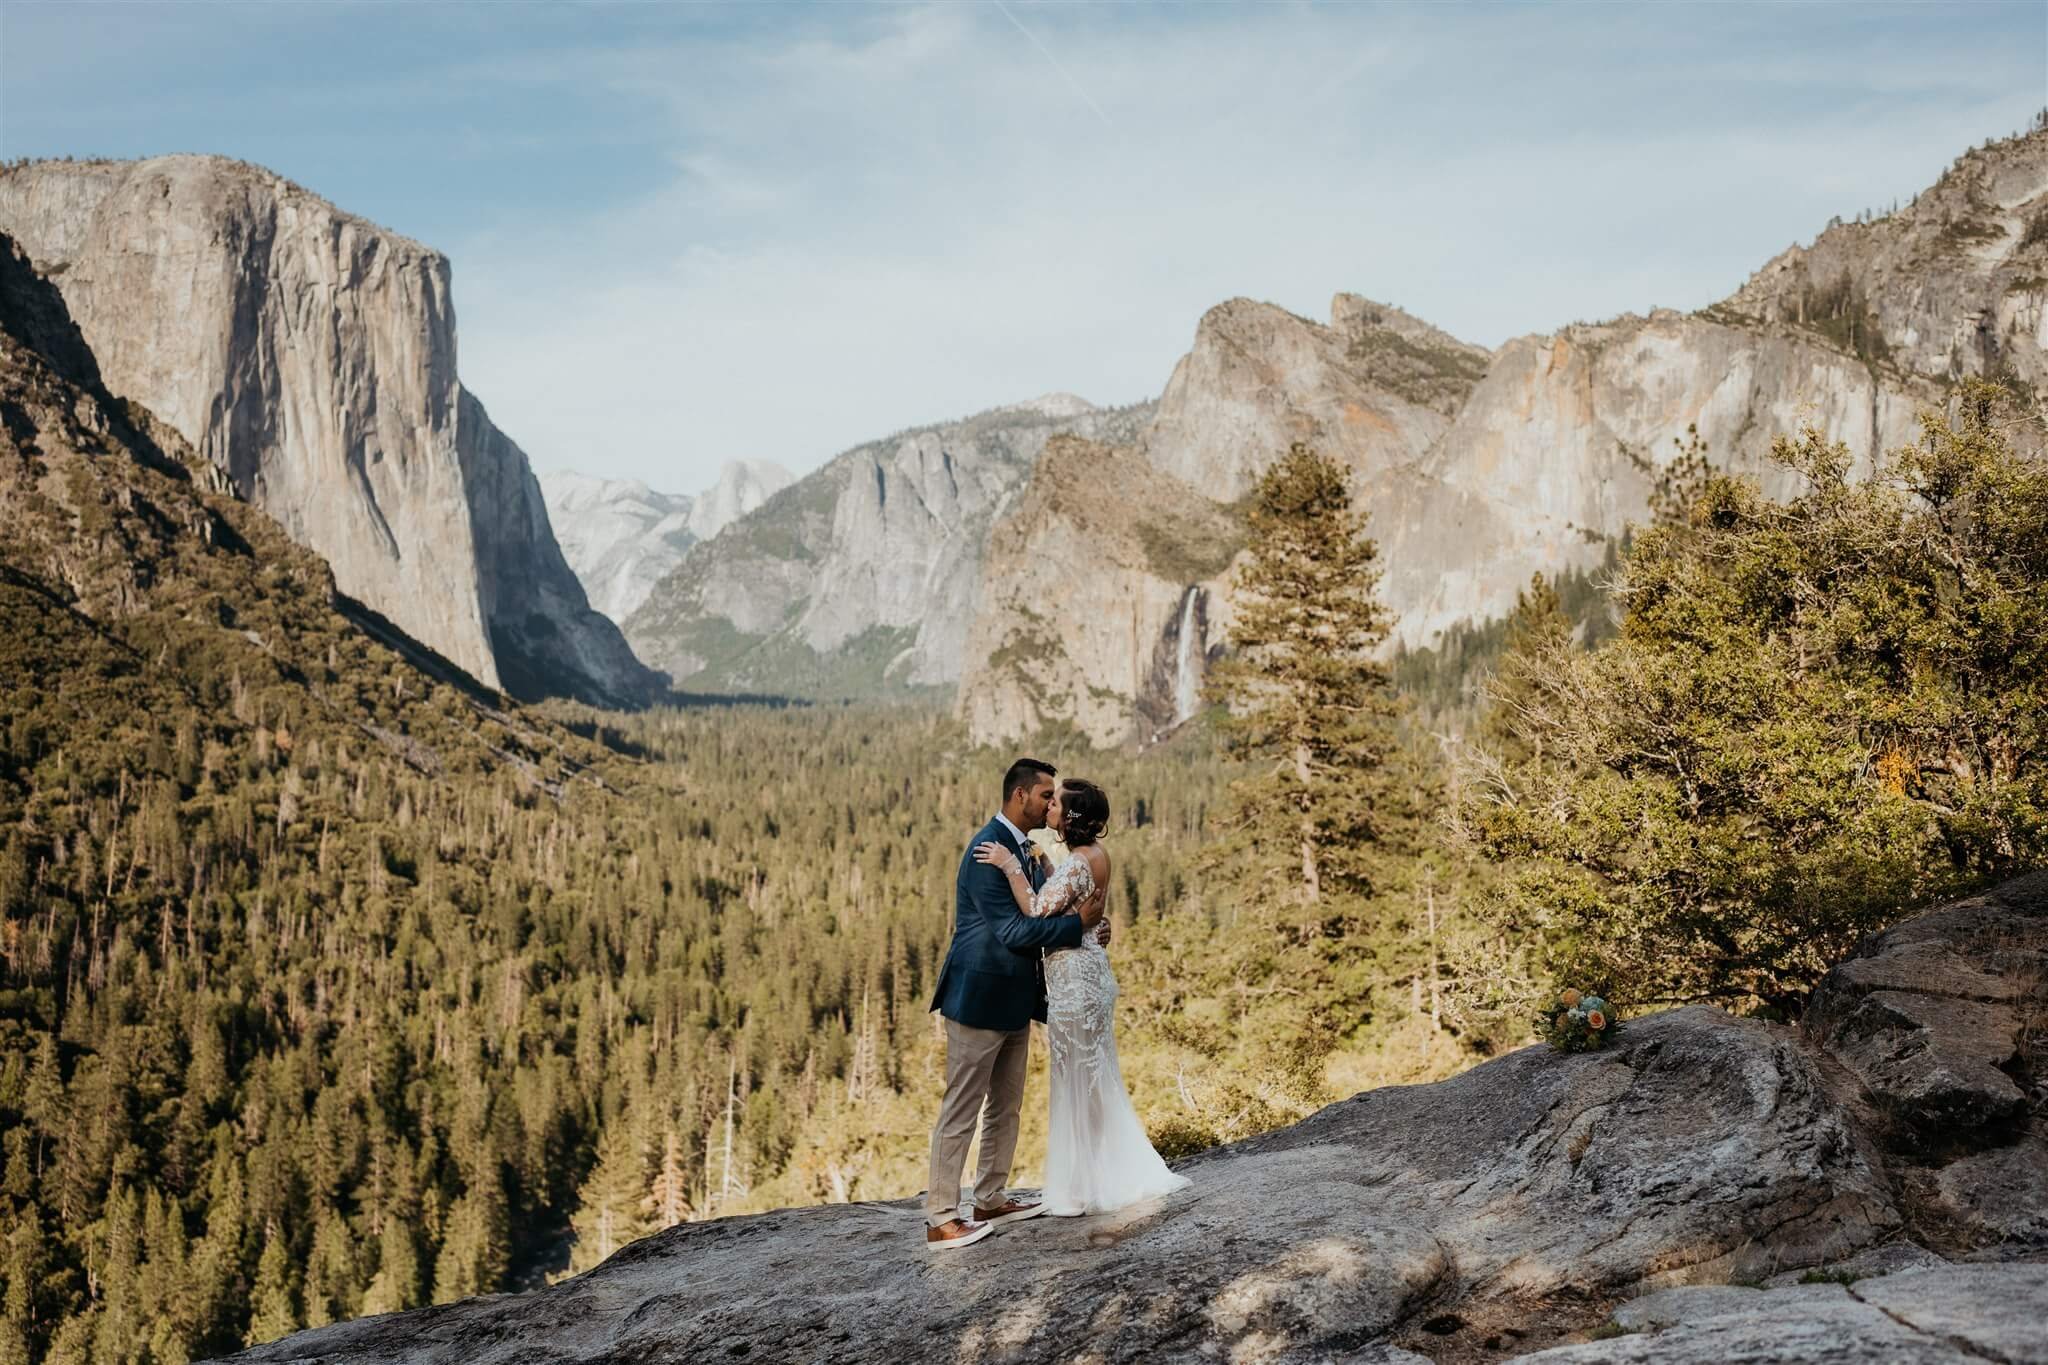 Bride and groom kiss after eloping in Yosemite at Tunnel View